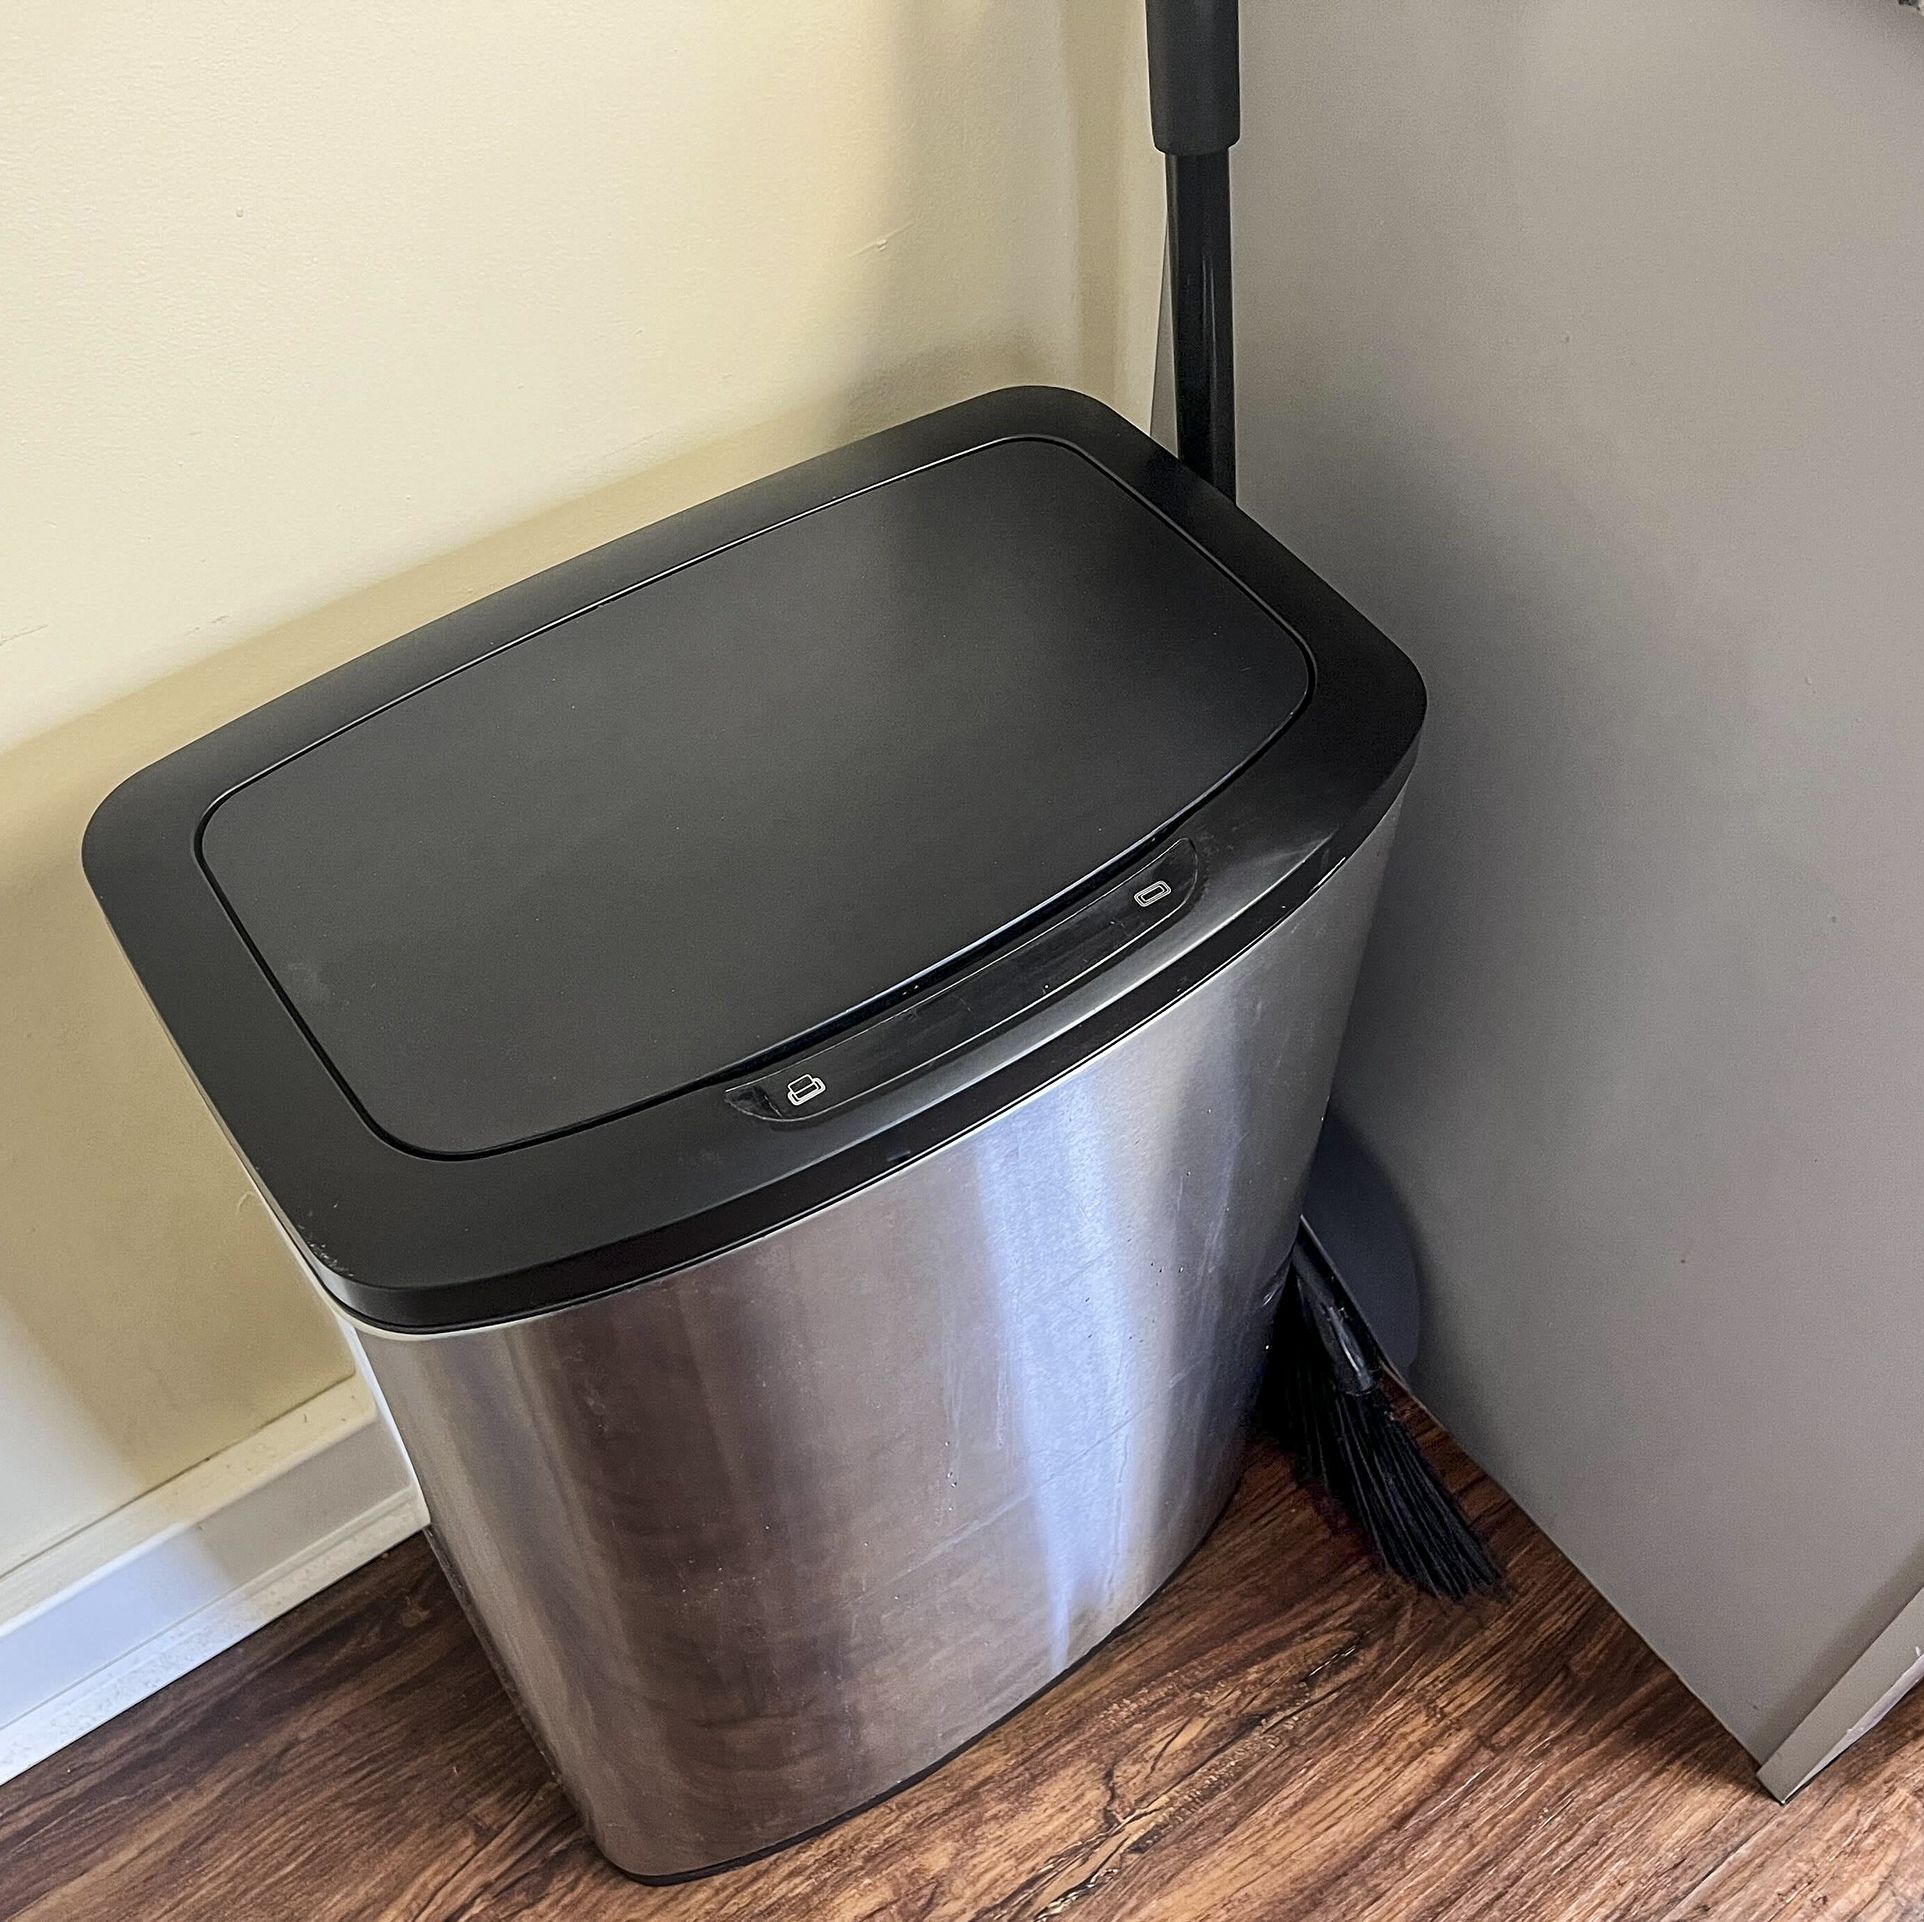 Keep Your Home Stylish and Spotless With These Top-Rated Trash Cans